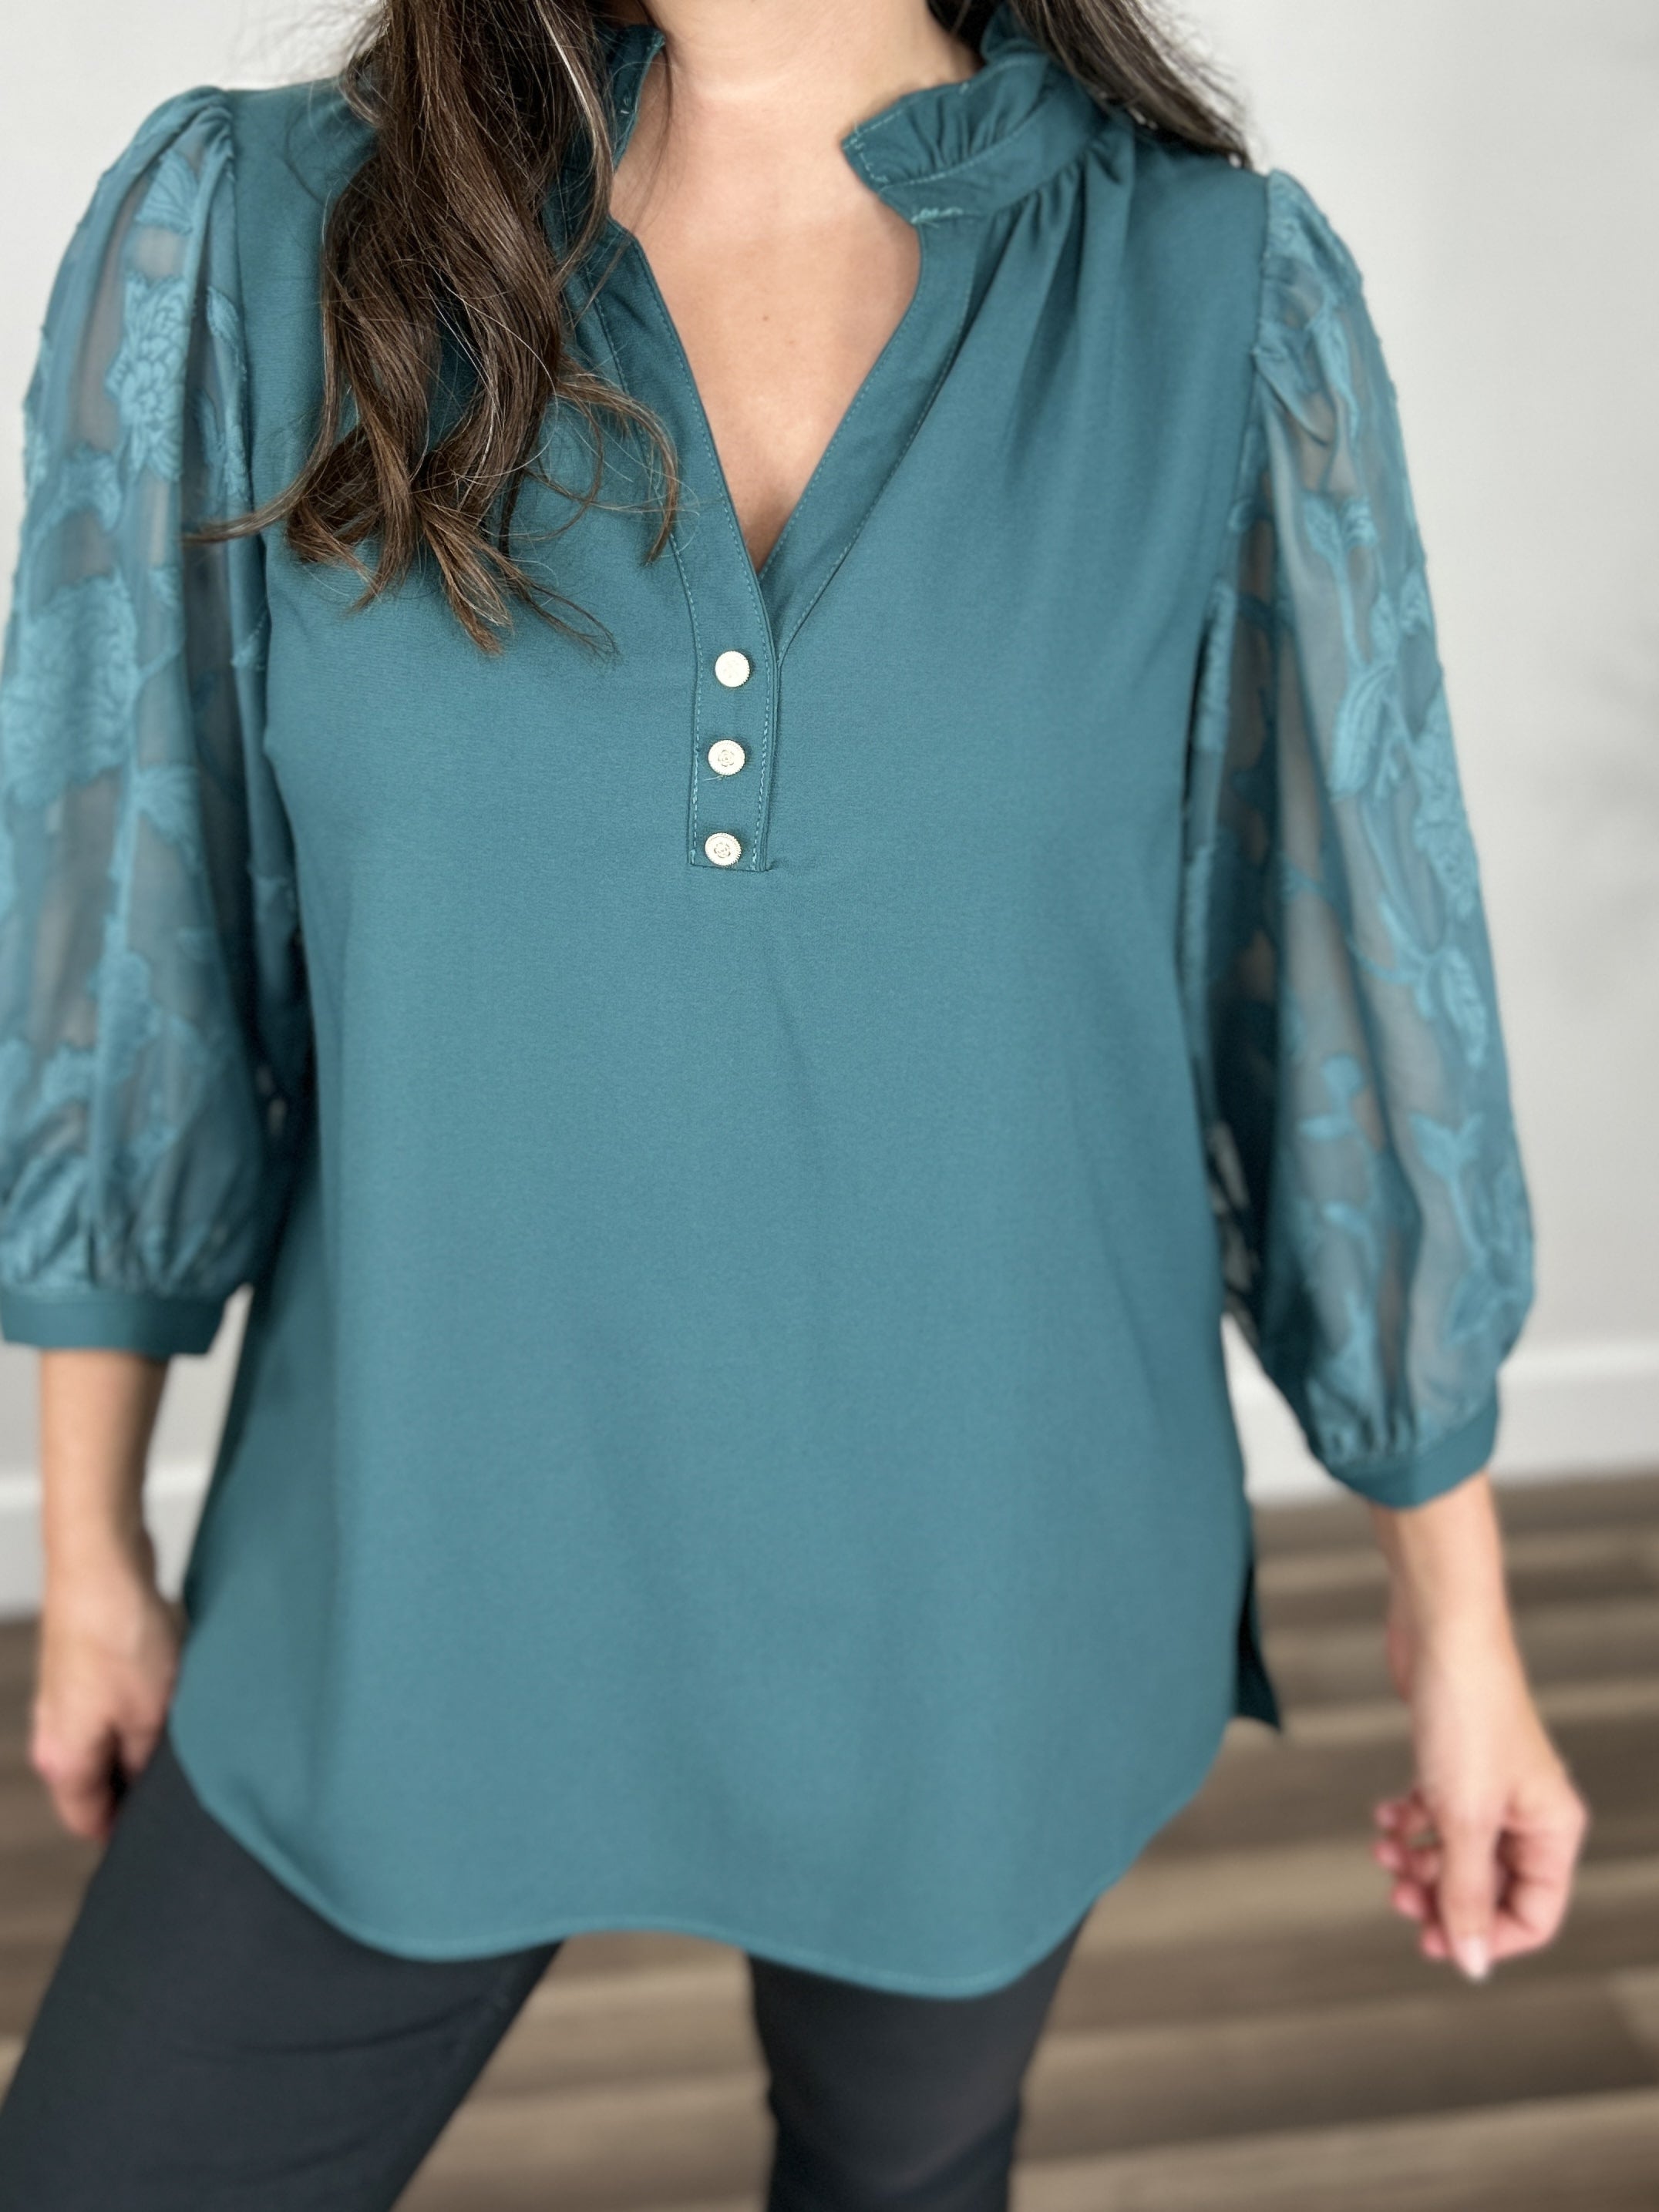 Upclose view of the women's teal three quarter sheer sleeve top with v neckline and decorative flower button detail.